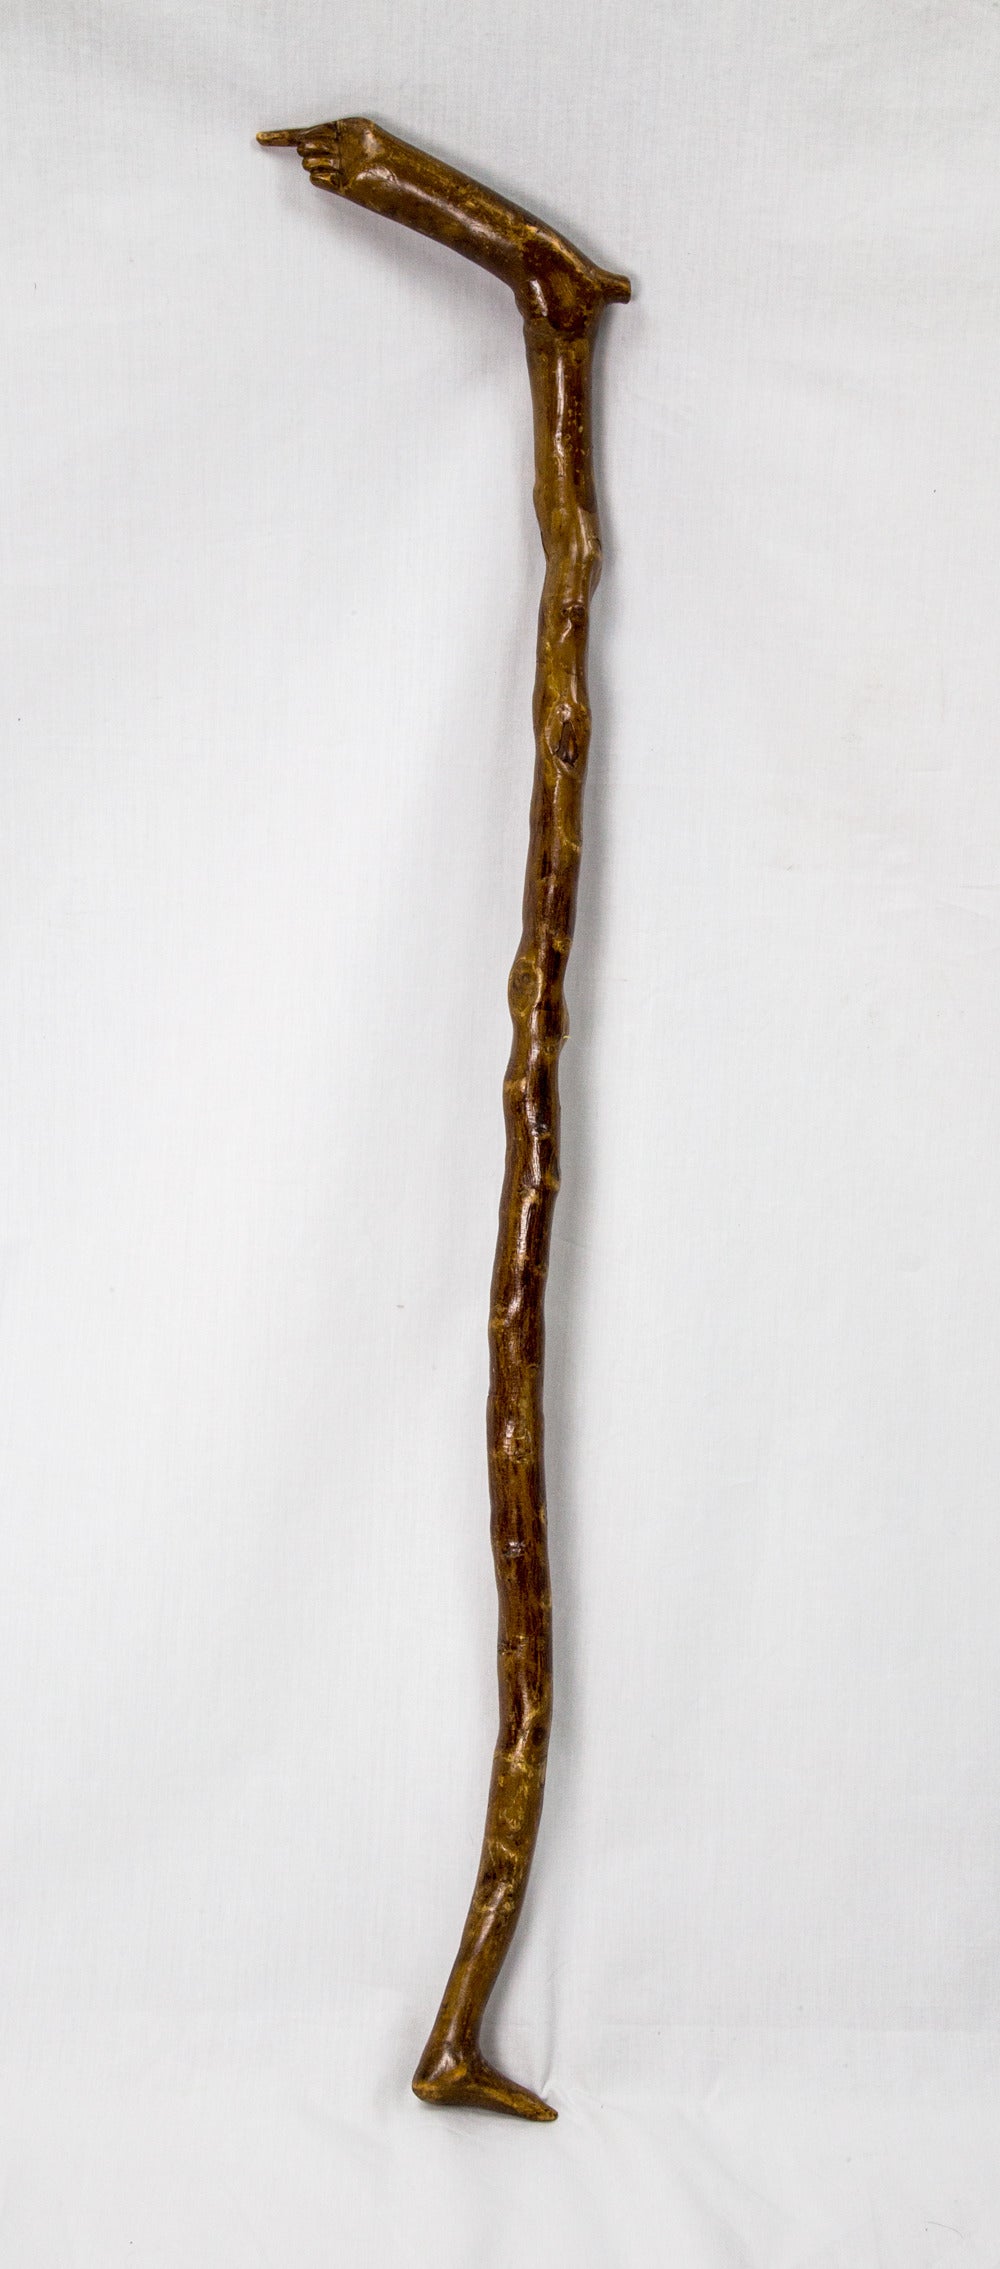 Unique Folk Art wood walking stick cane featuring a hand grip and a foot at the bottom; beautifully hand-carved with a wonderful feel. Great color and patina; measuring approximate 31” long x 0.866” diameter; circa early 20th century.